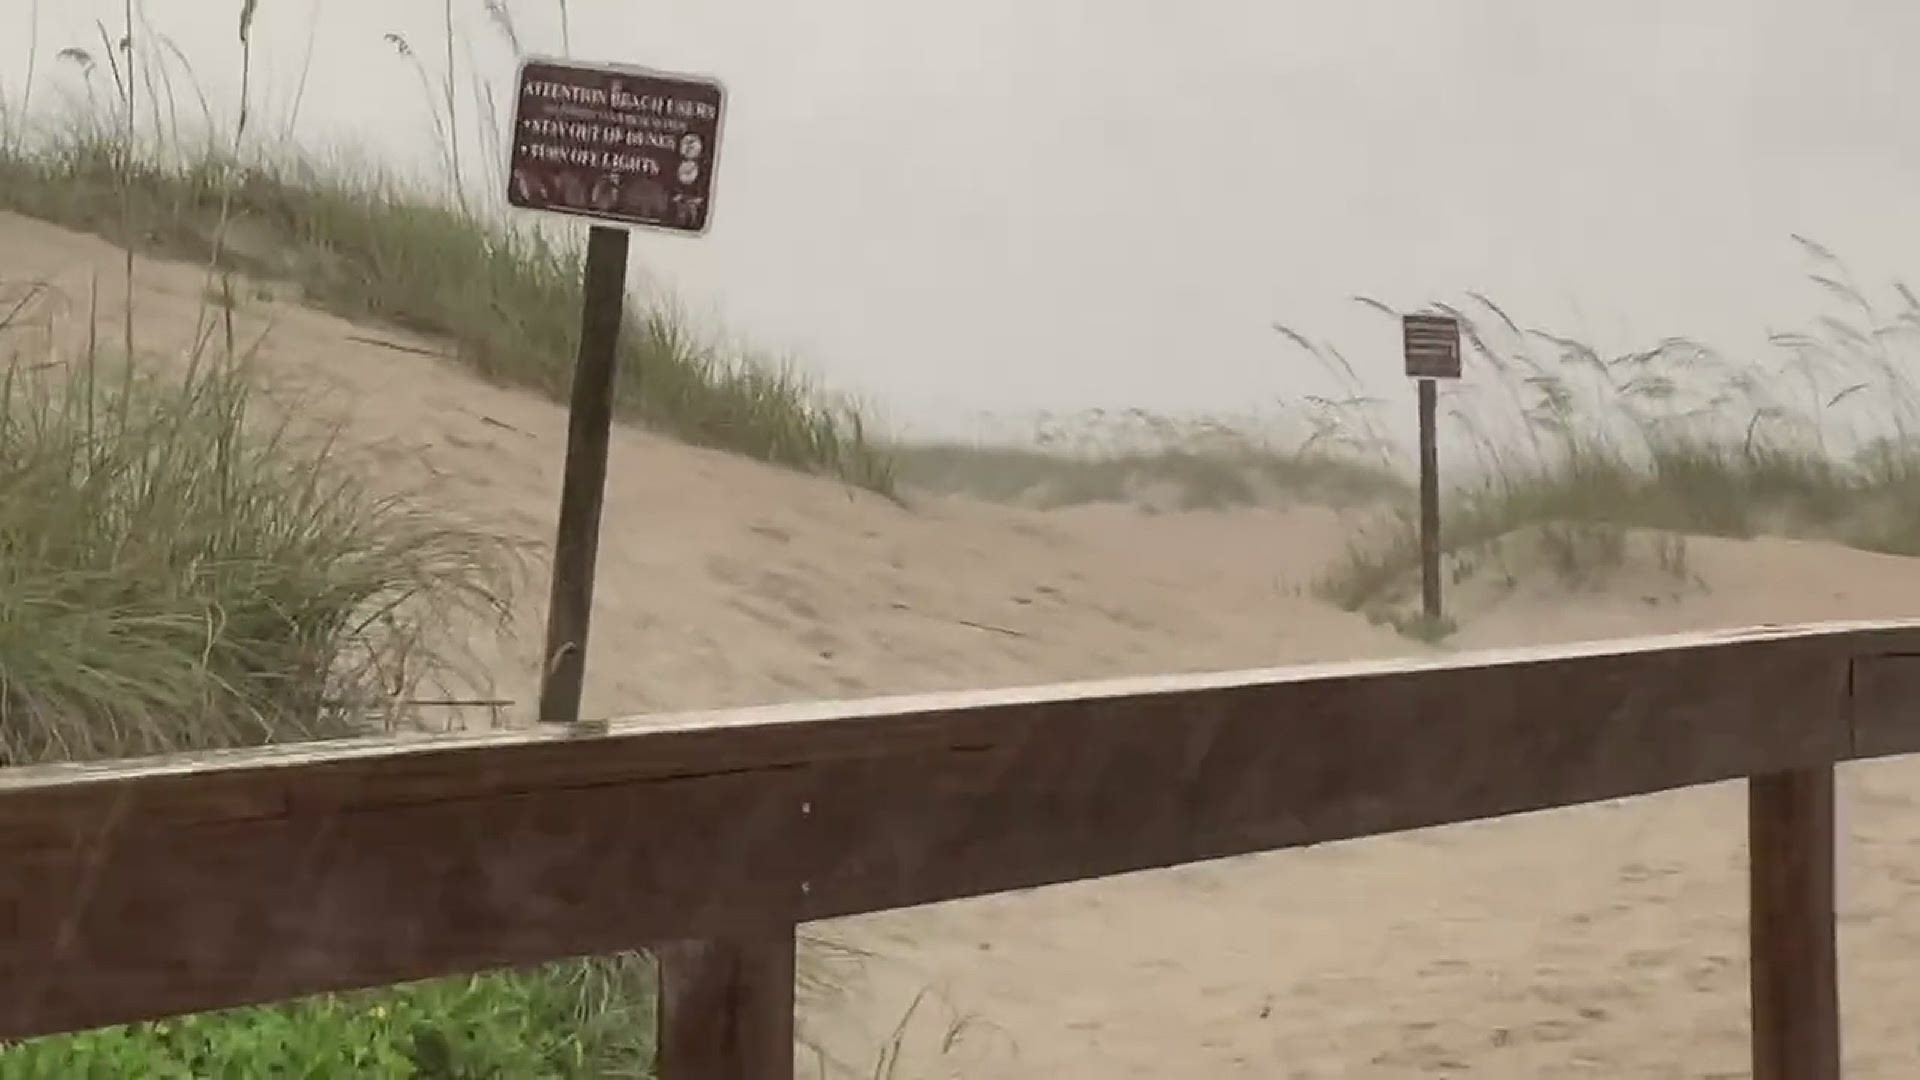 The rain started coming down harder shortly after 9 a.m. Wednesday as Elsa approaches Florida.
Credit: First Coast News